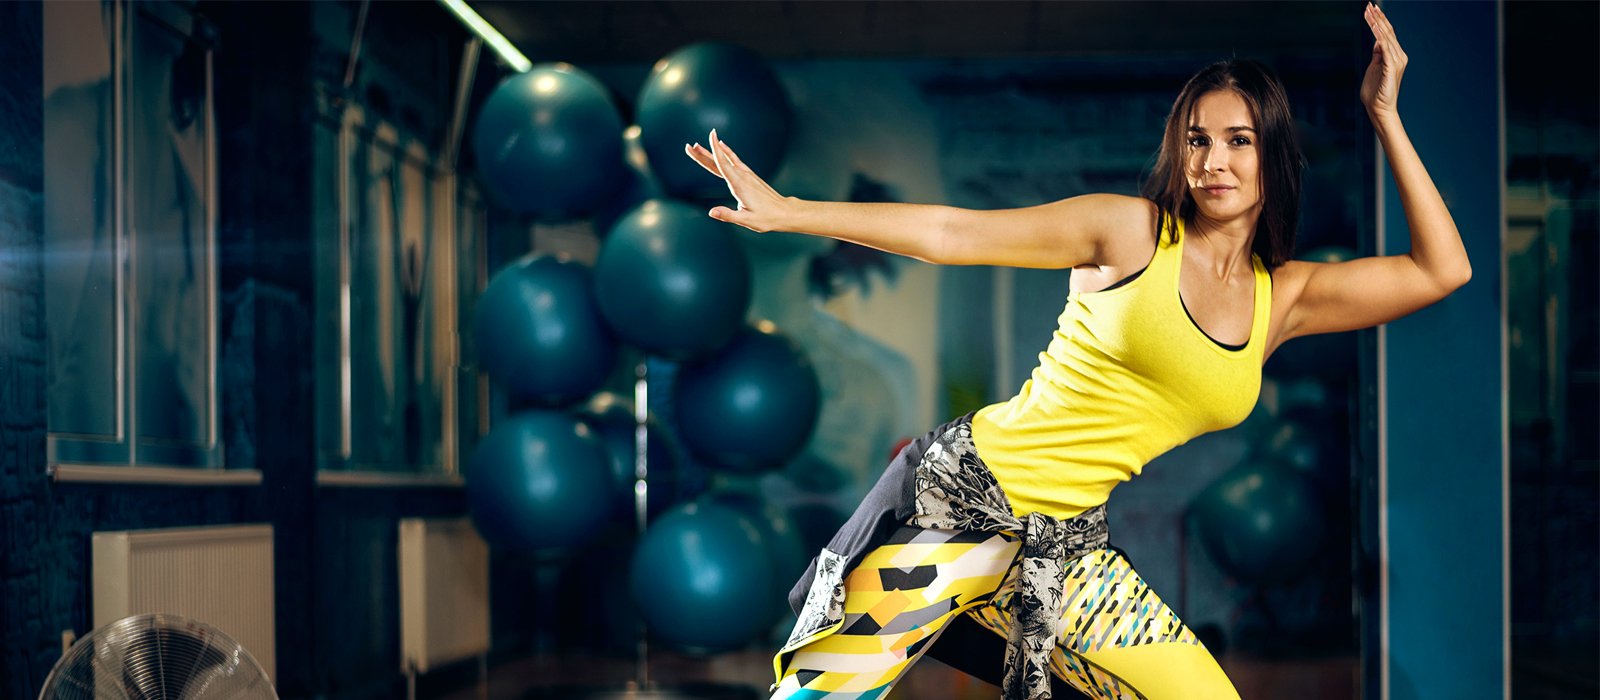 Toned Body While Having Fun, Who Doesn't Want That? Know These Amazing Benefits Of Doing Zumba